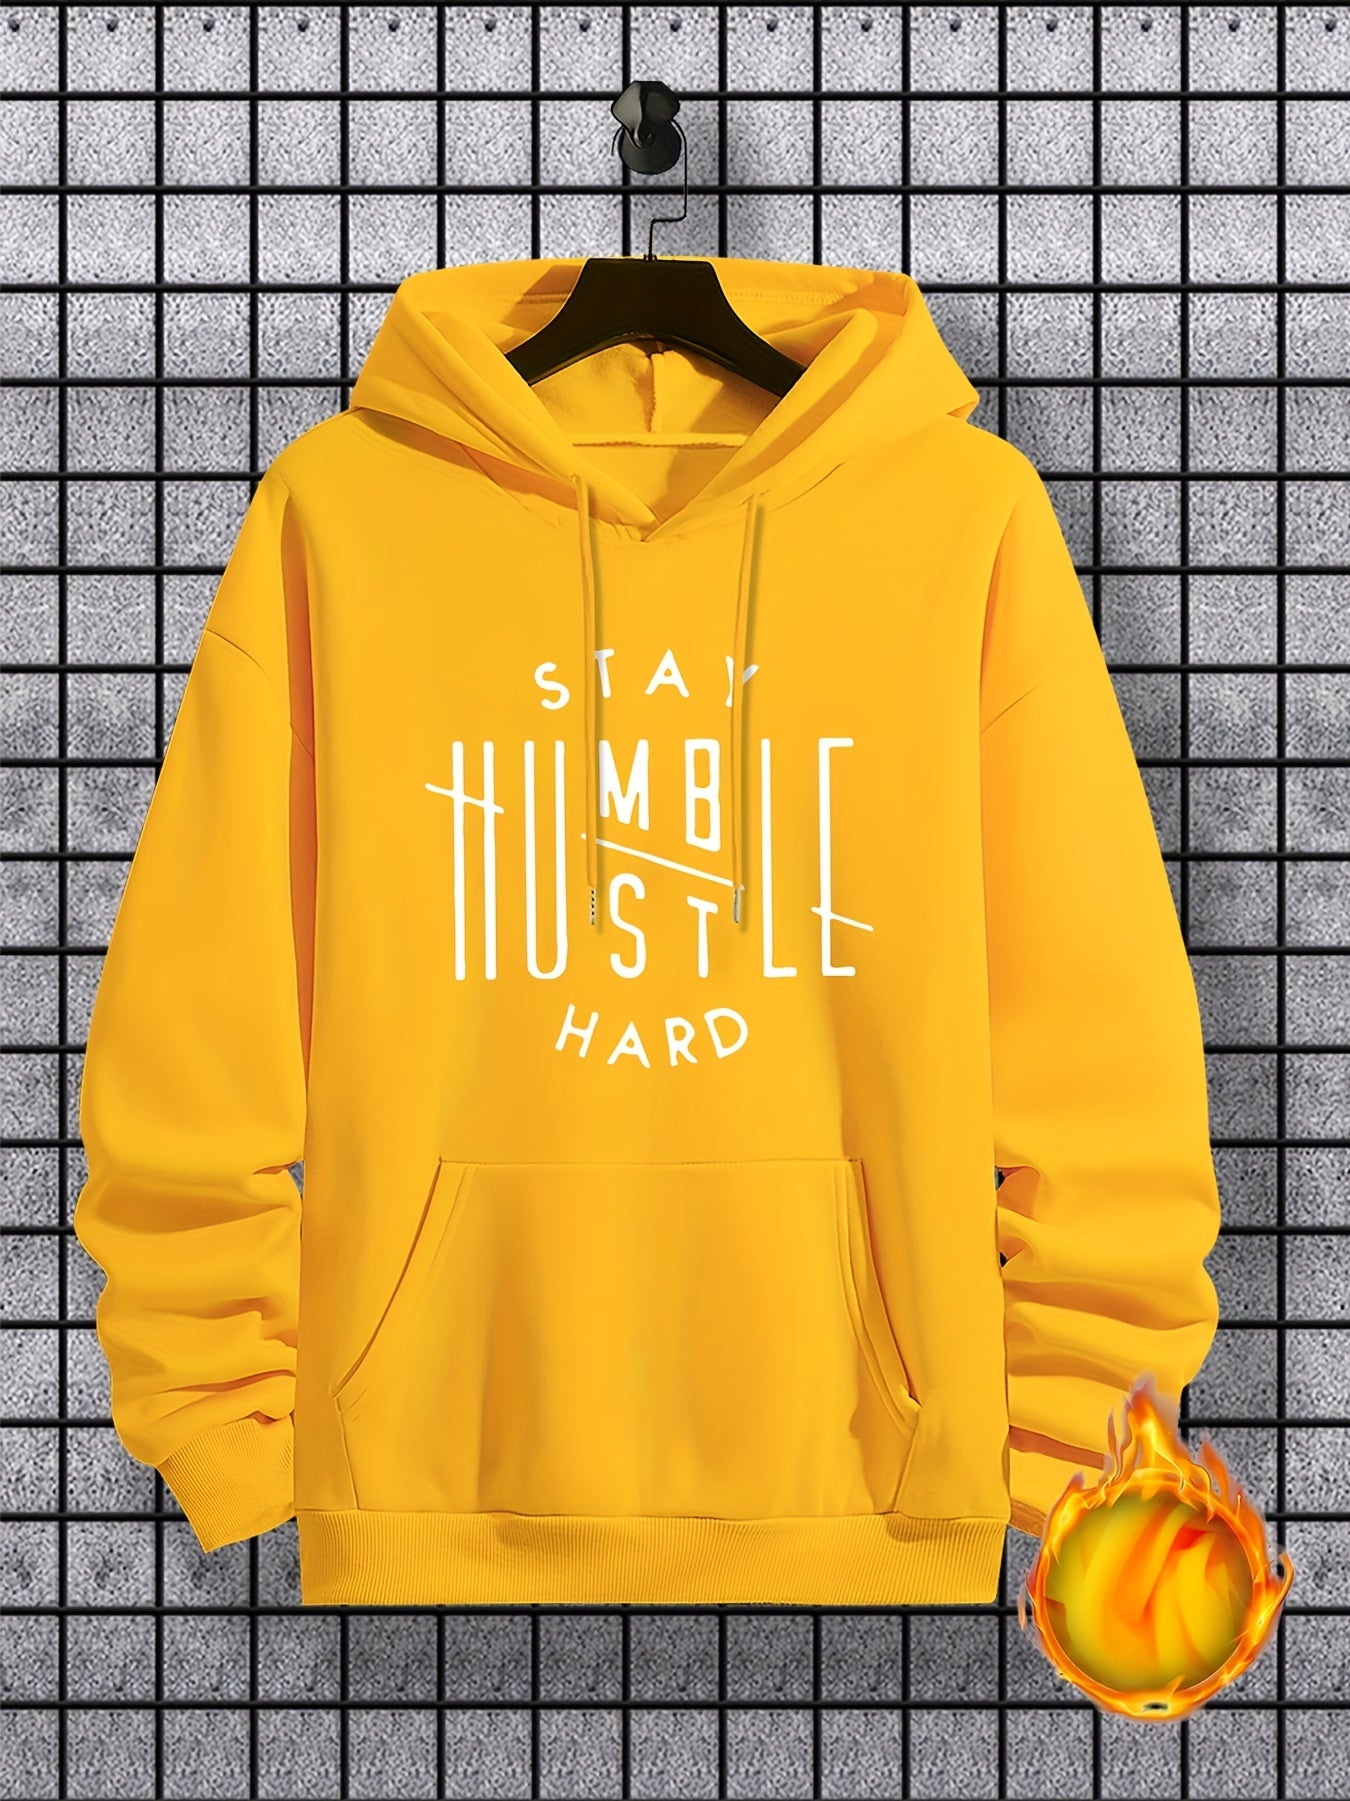 Stay Humble & Hustle Print Hoodie, Cool Hoodies For Men, Men's Casual Graphic Design Pullover Hooded Sweatshirt With Kangaroo Pocket Streetwear For Winter Fall, As Gifts